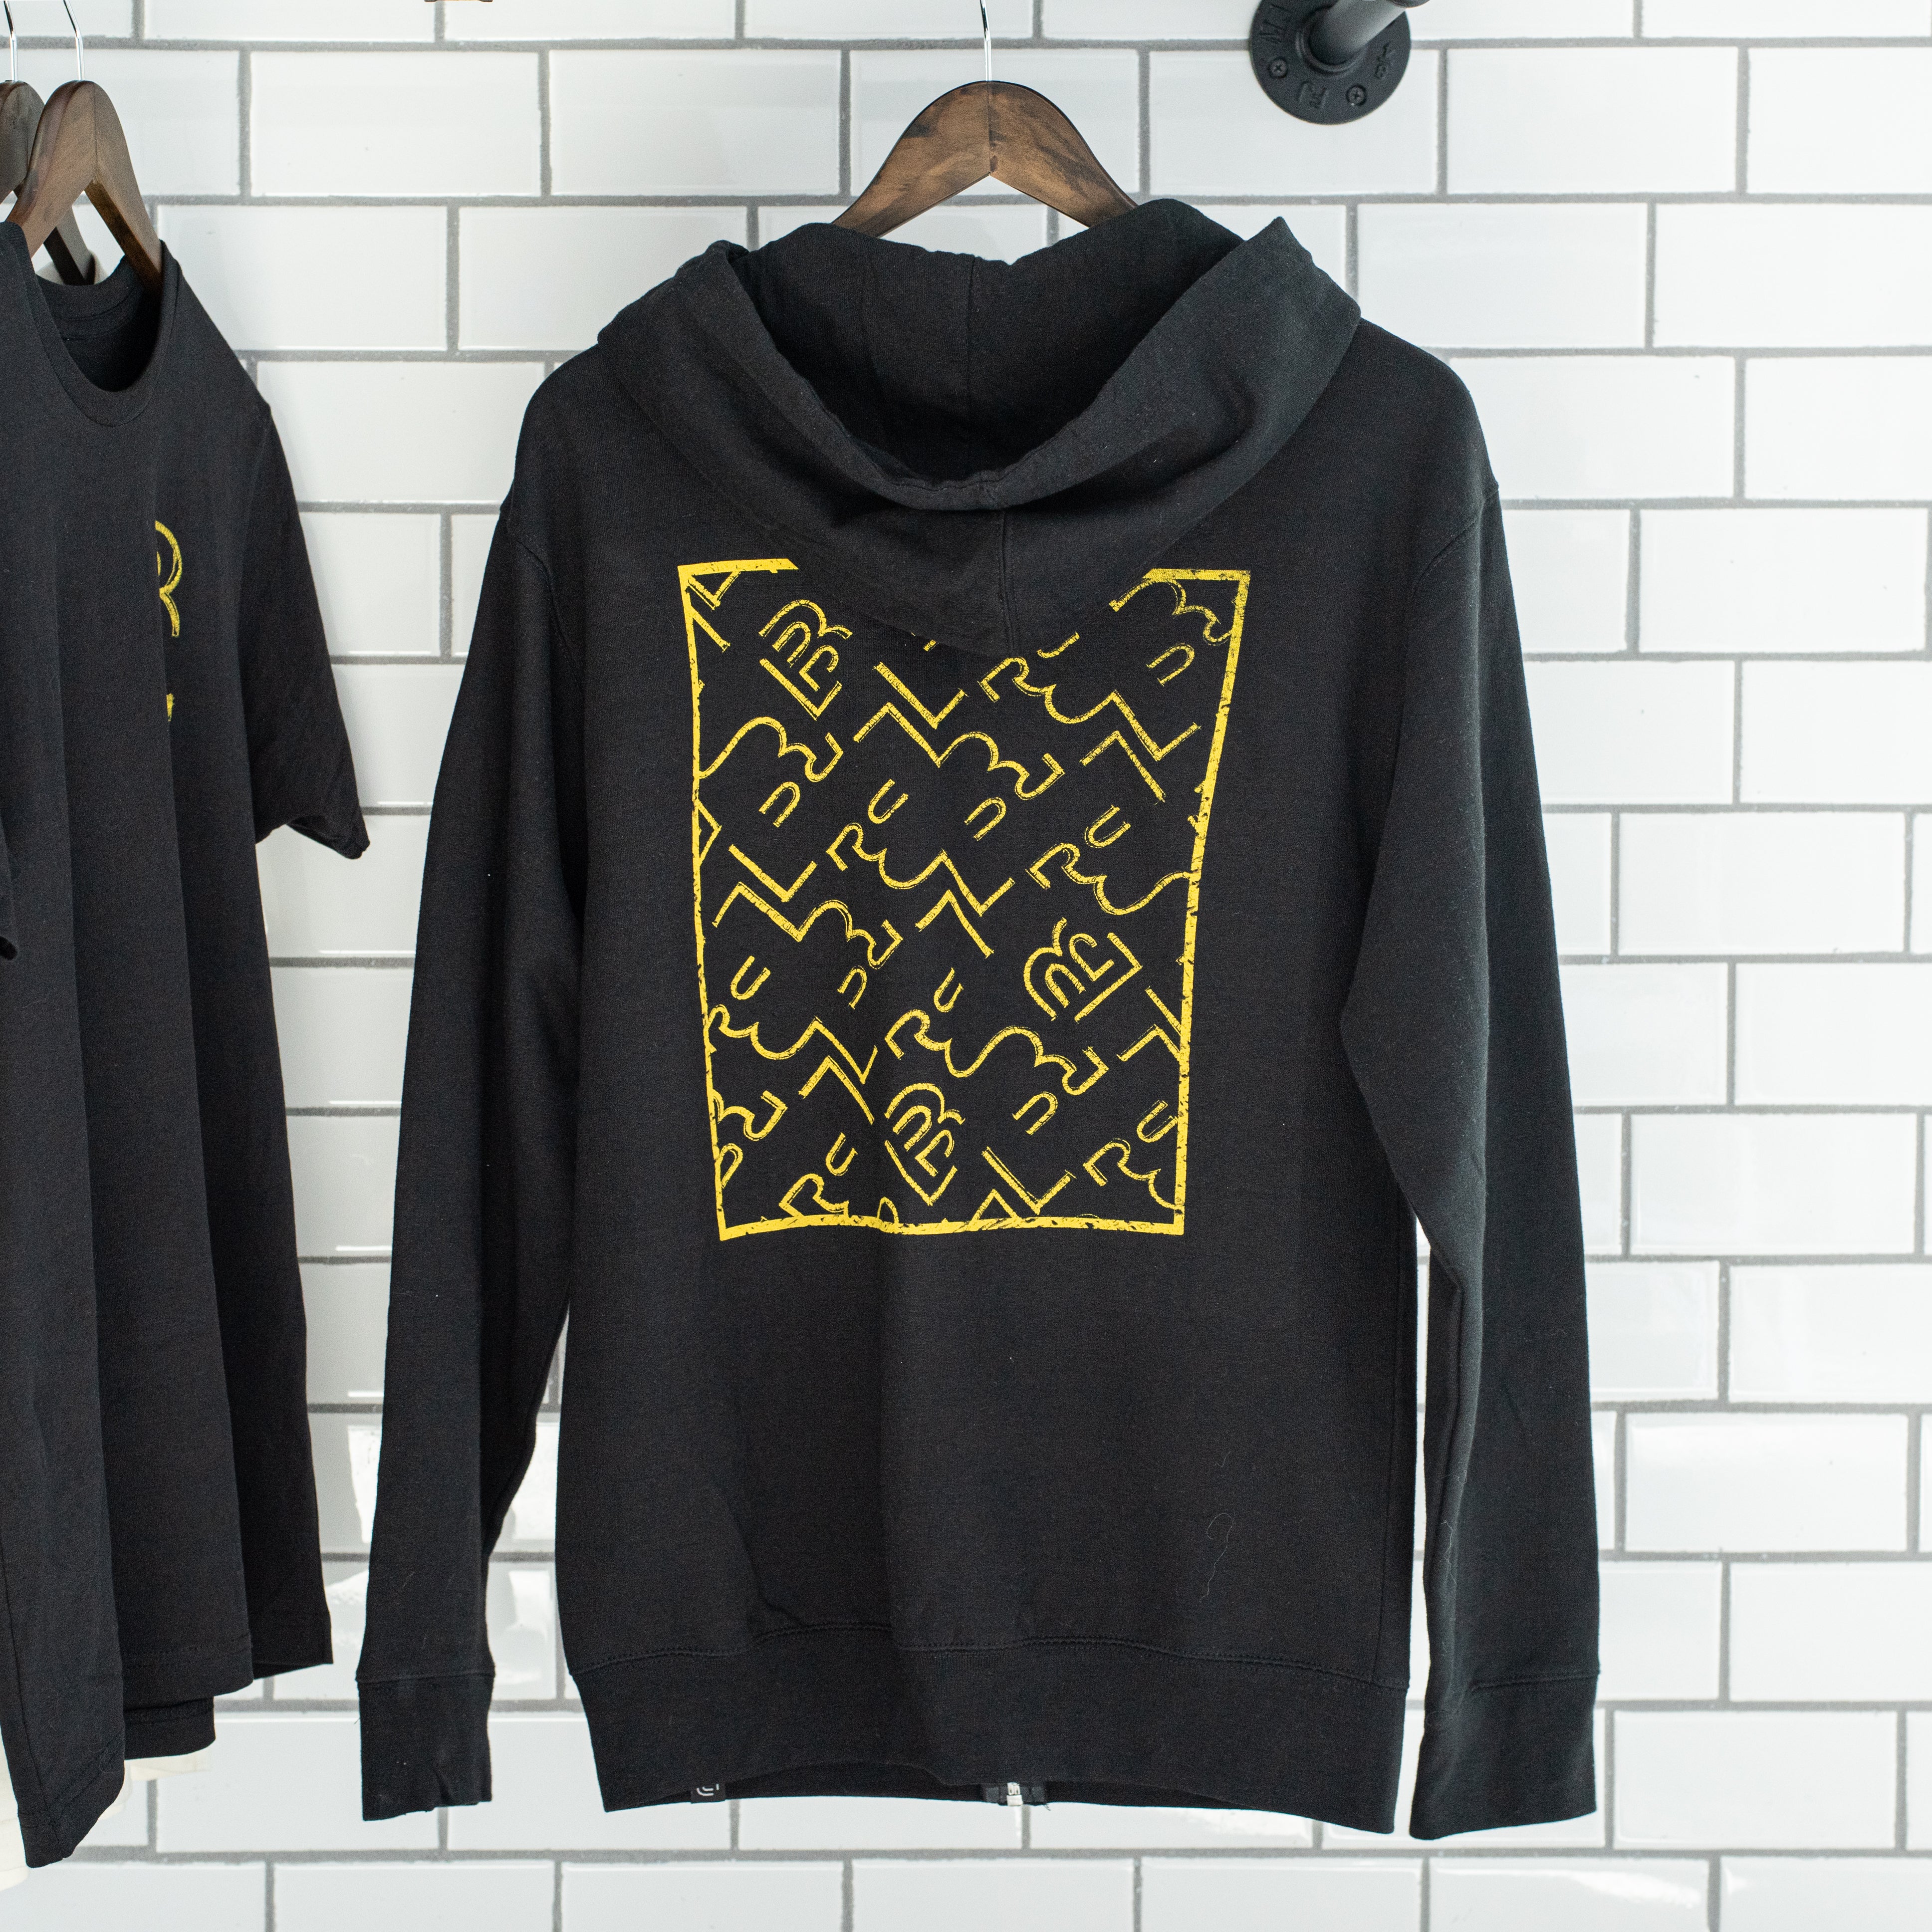 A Blackwing Sketch Zip-up Hooded Sweatshirt with a yellow design hangs on a brick wall from the Winter 2019 Blueprint capsule.